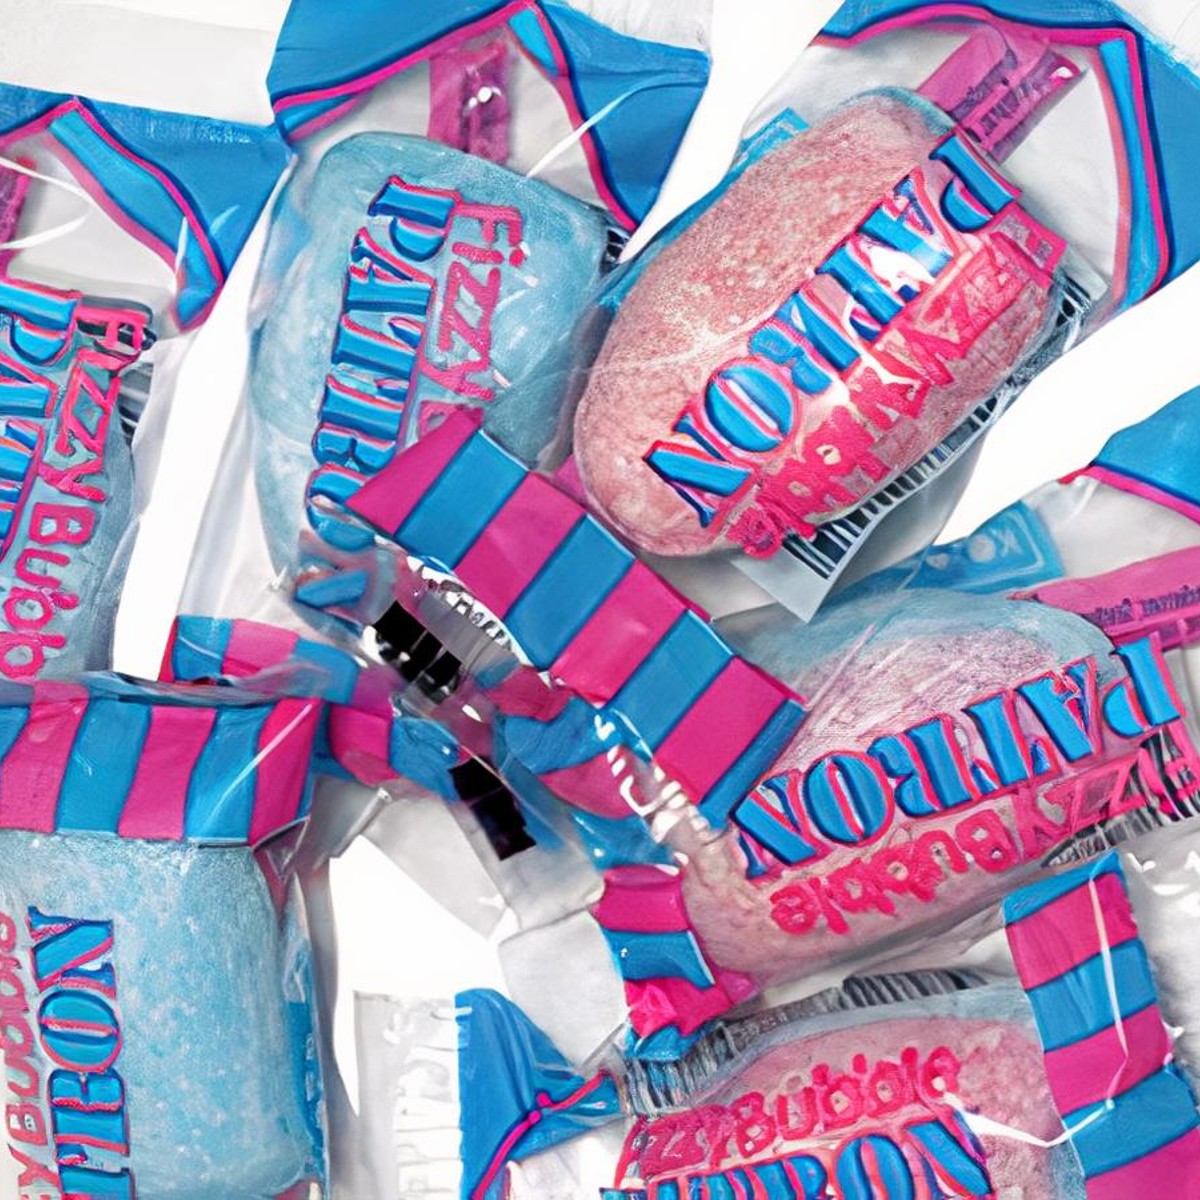 Bonbon - What are these old favourites? – Sweecandy